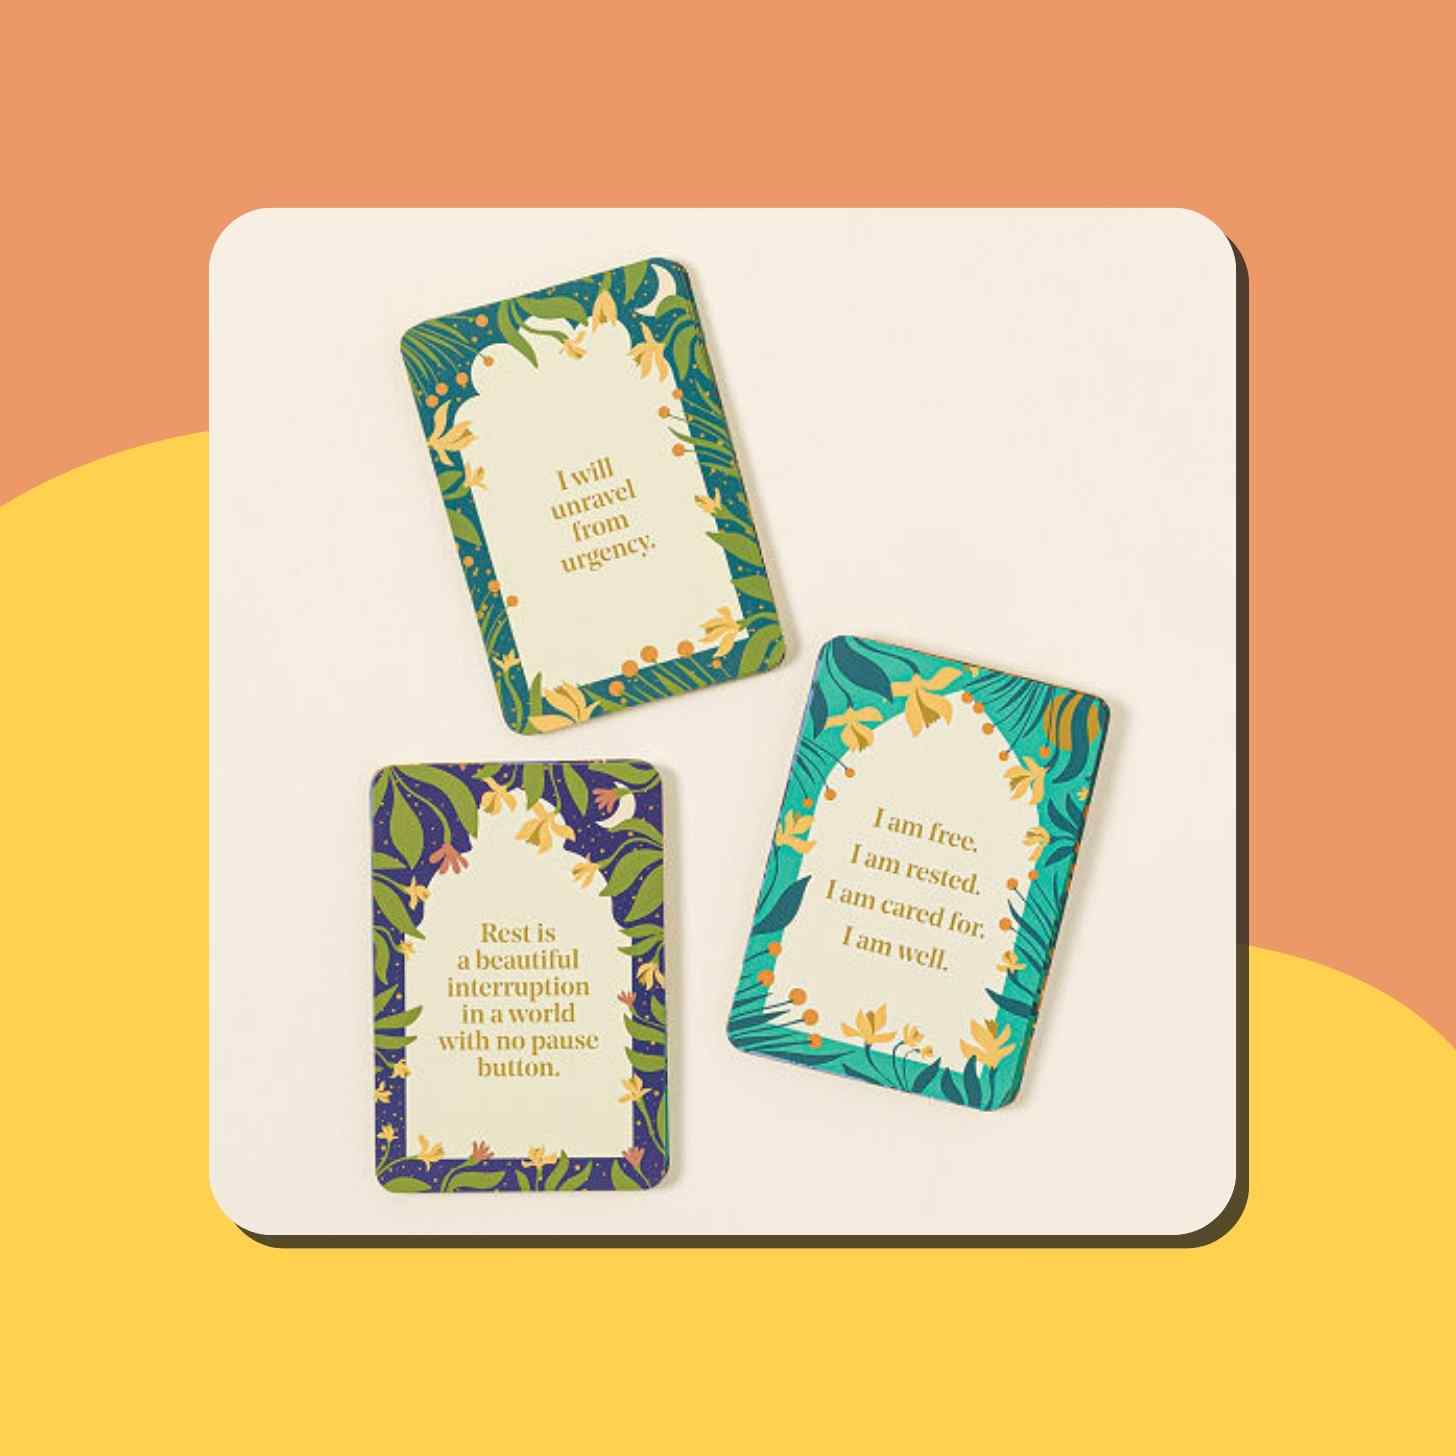 Three Affirmation Cards With Positive Messages Written 